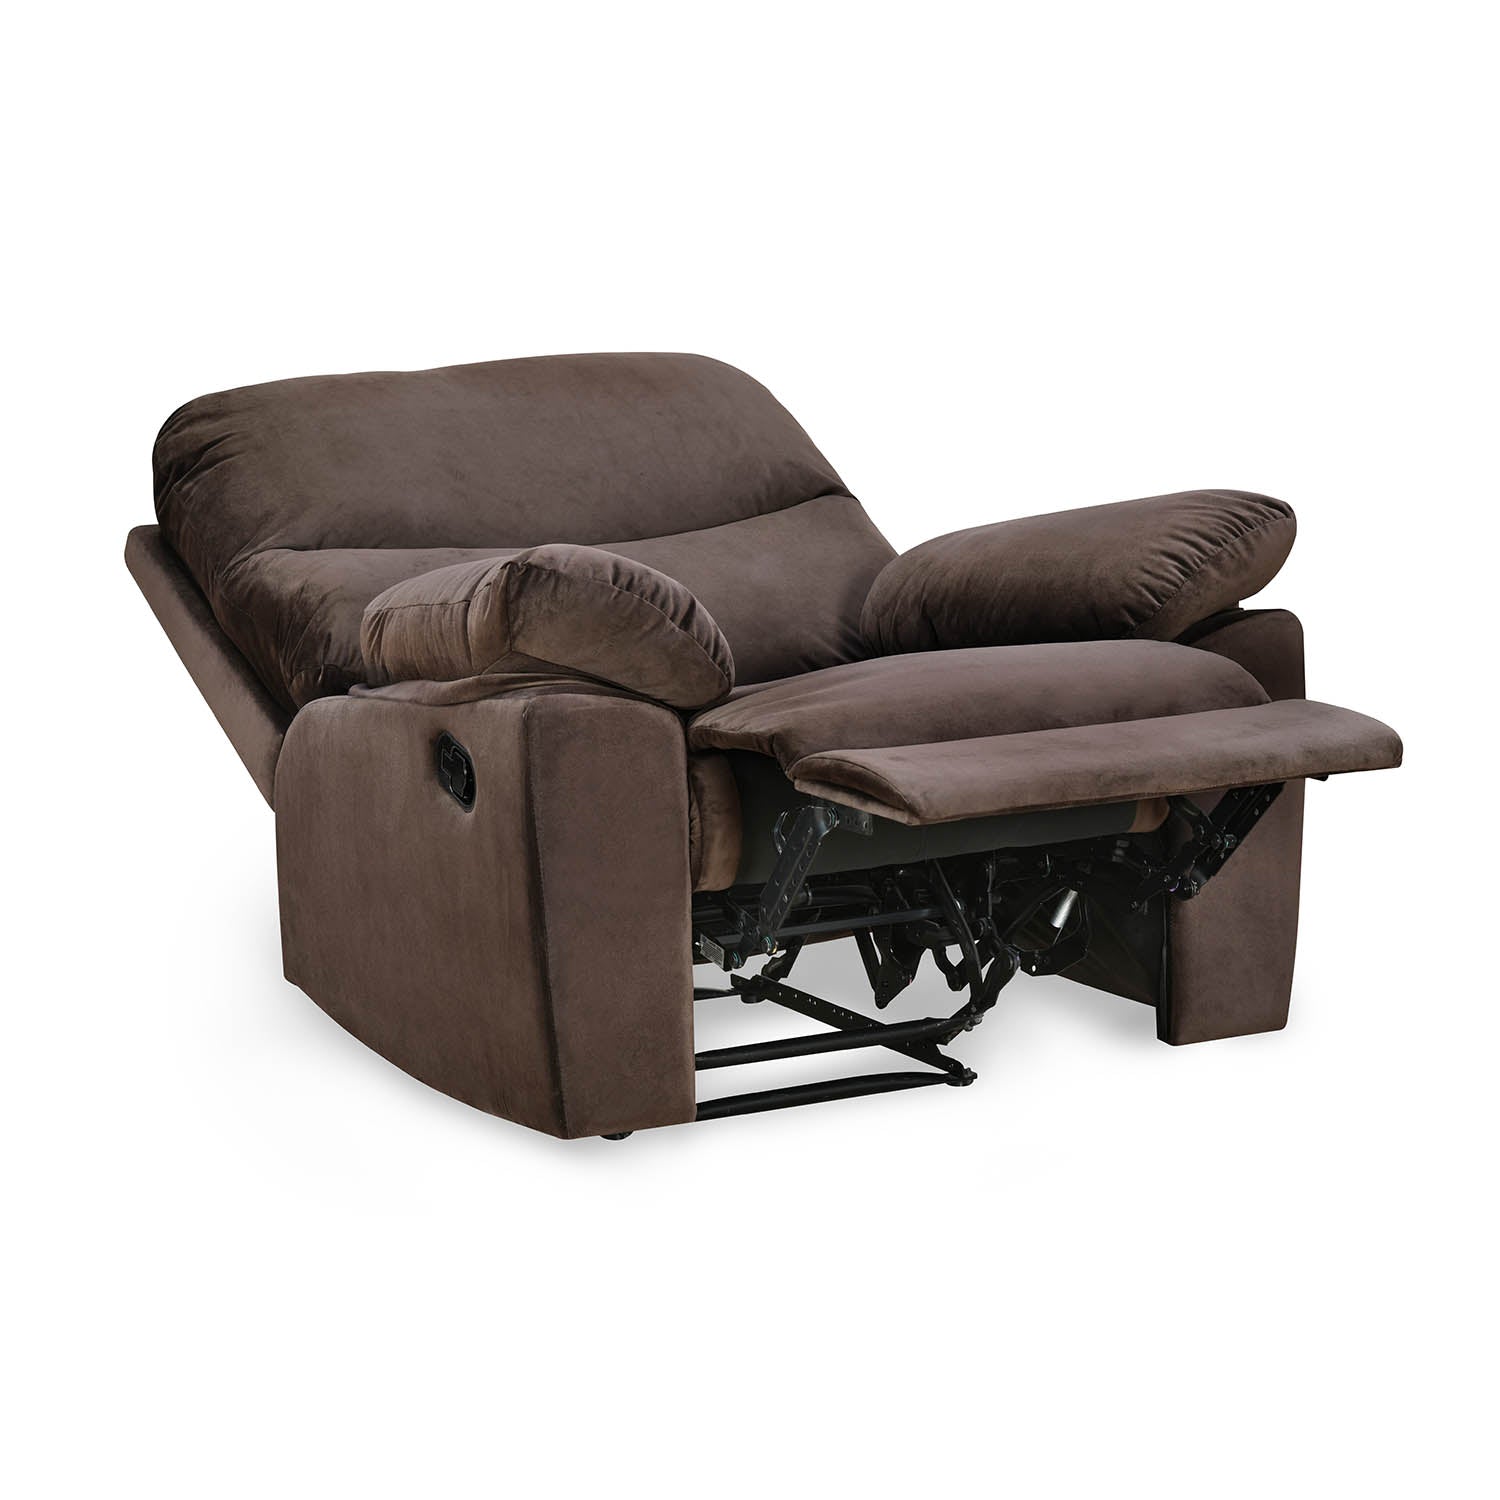 Rayford 1 Seater Fabric Manual Recliner (Brown)